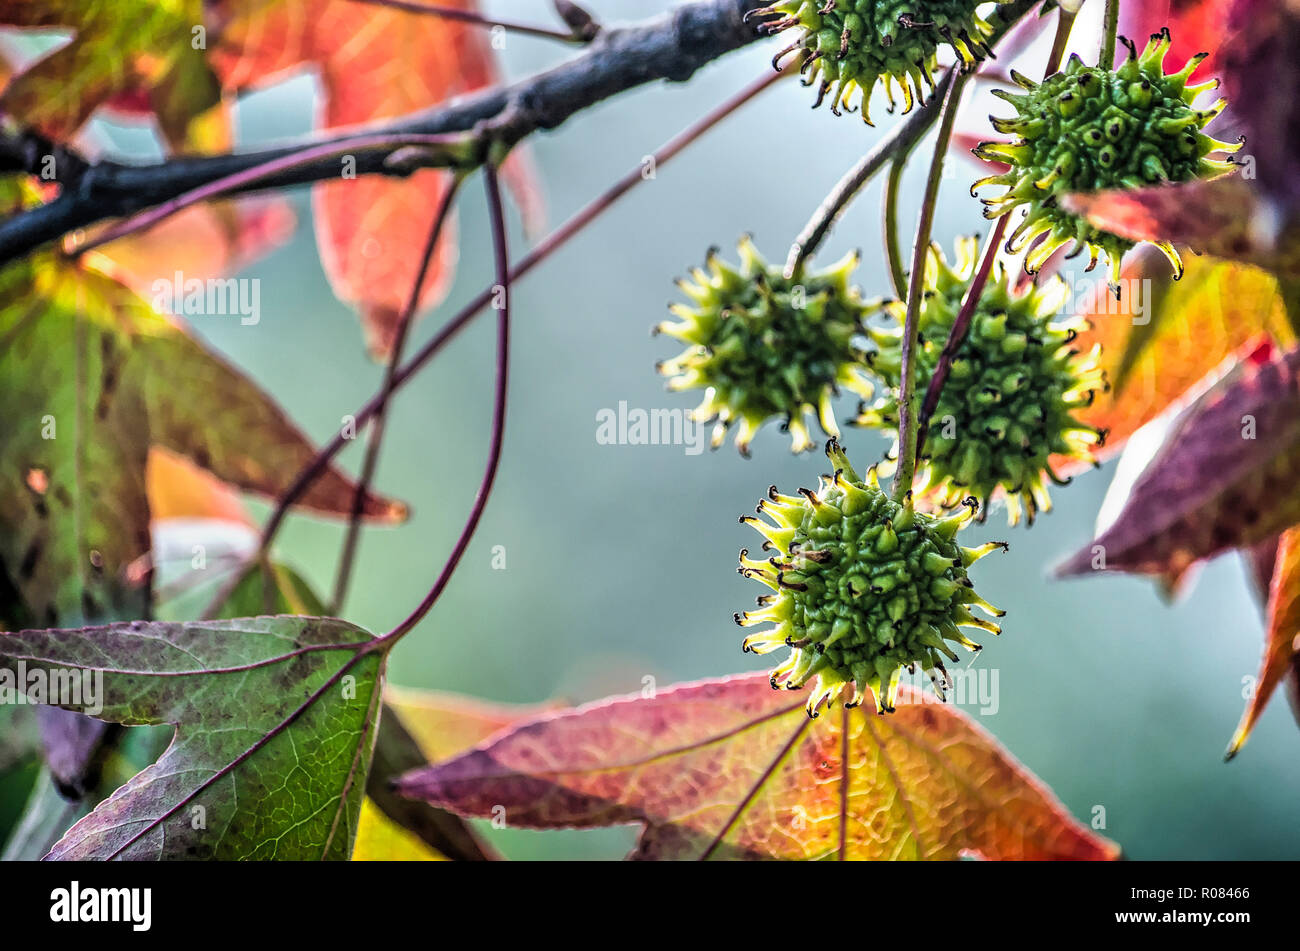 Close-up of the green spiky spherical fruits of a sweet gum tree surrounded by several colorful star-shaped leaves Stock Photo